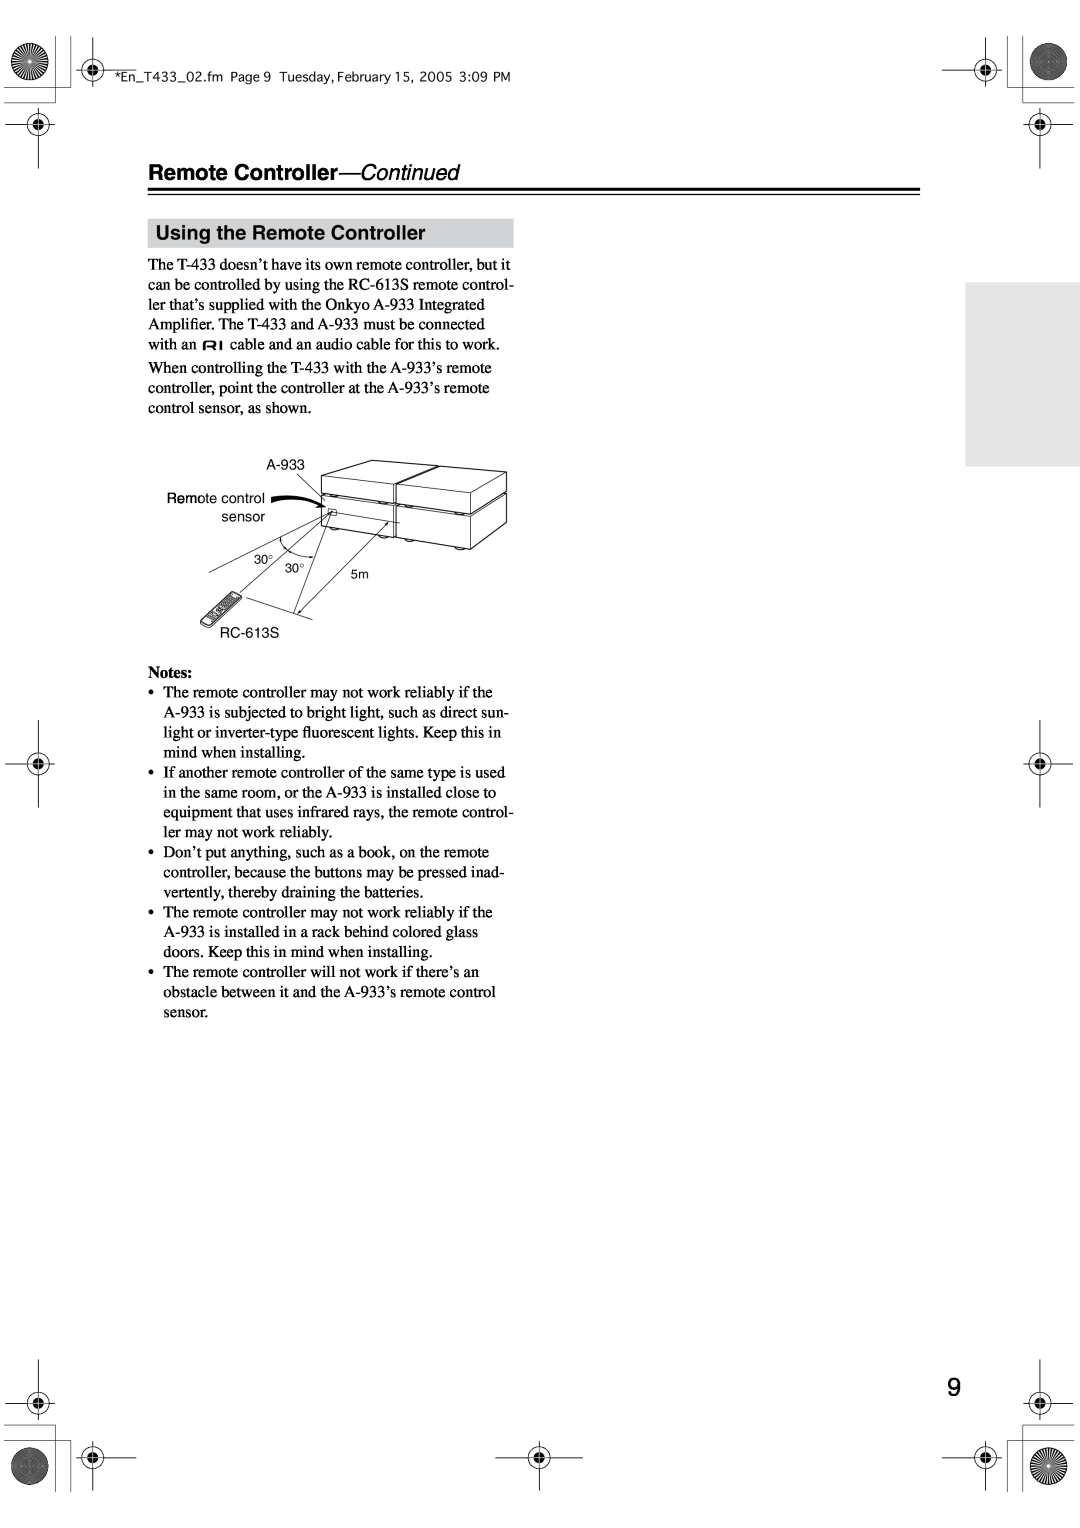 Onkyo T-433 instruction manual Remote Controller-Continued, Using the Remote Controller, Notes 